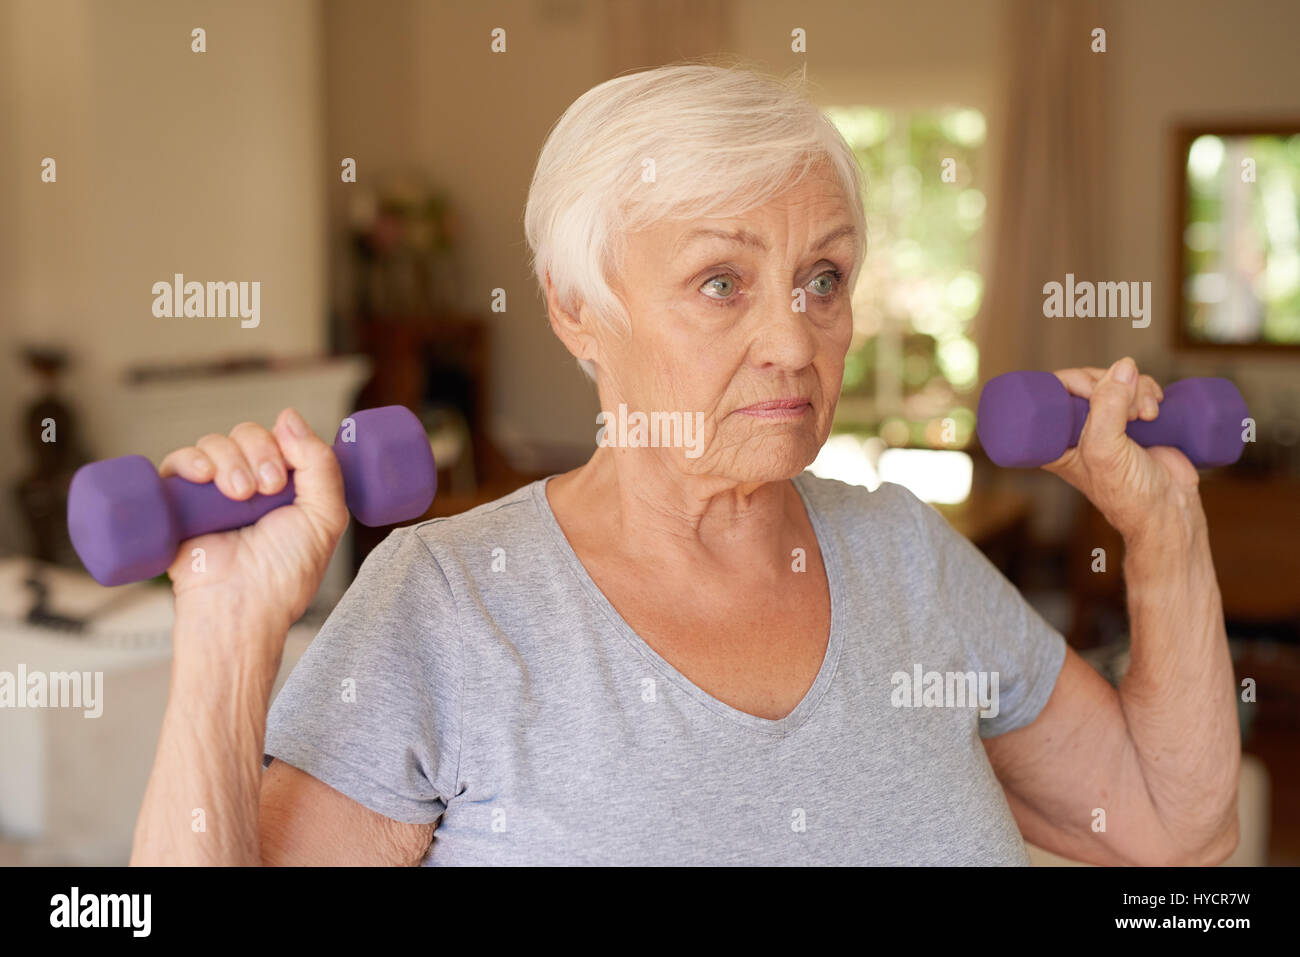 Active senior woman focused on lifting dumbells at home Stock Photo